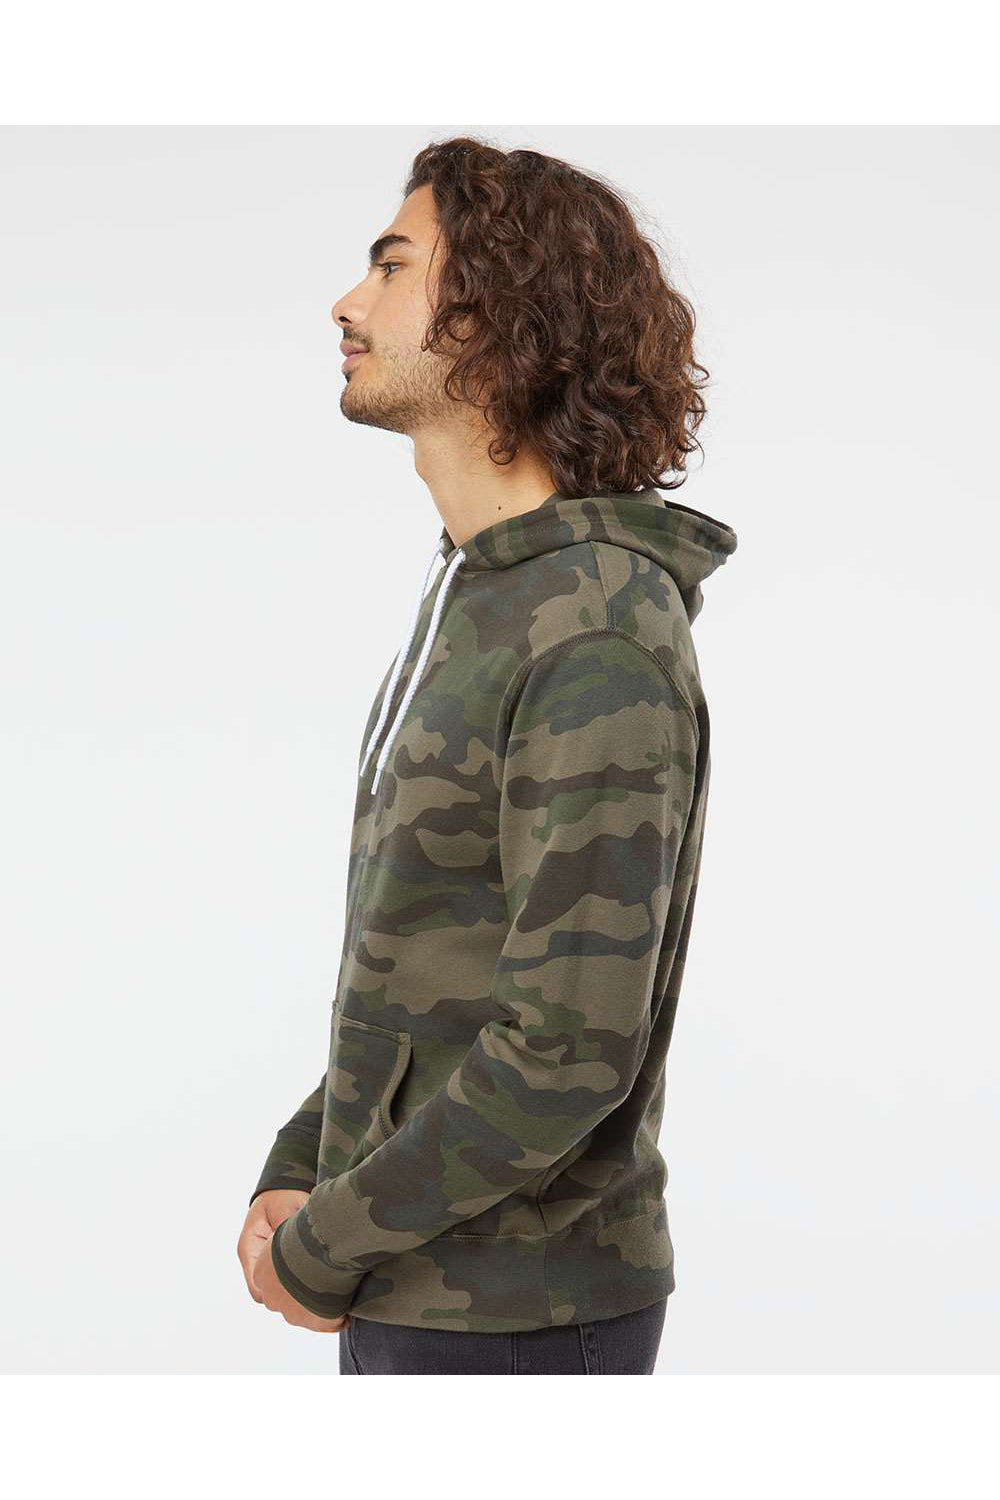 Independent Trading Co. AFX90UN Mens Hooded Sweatshirt Hoodie Forest Green Camo Model Side